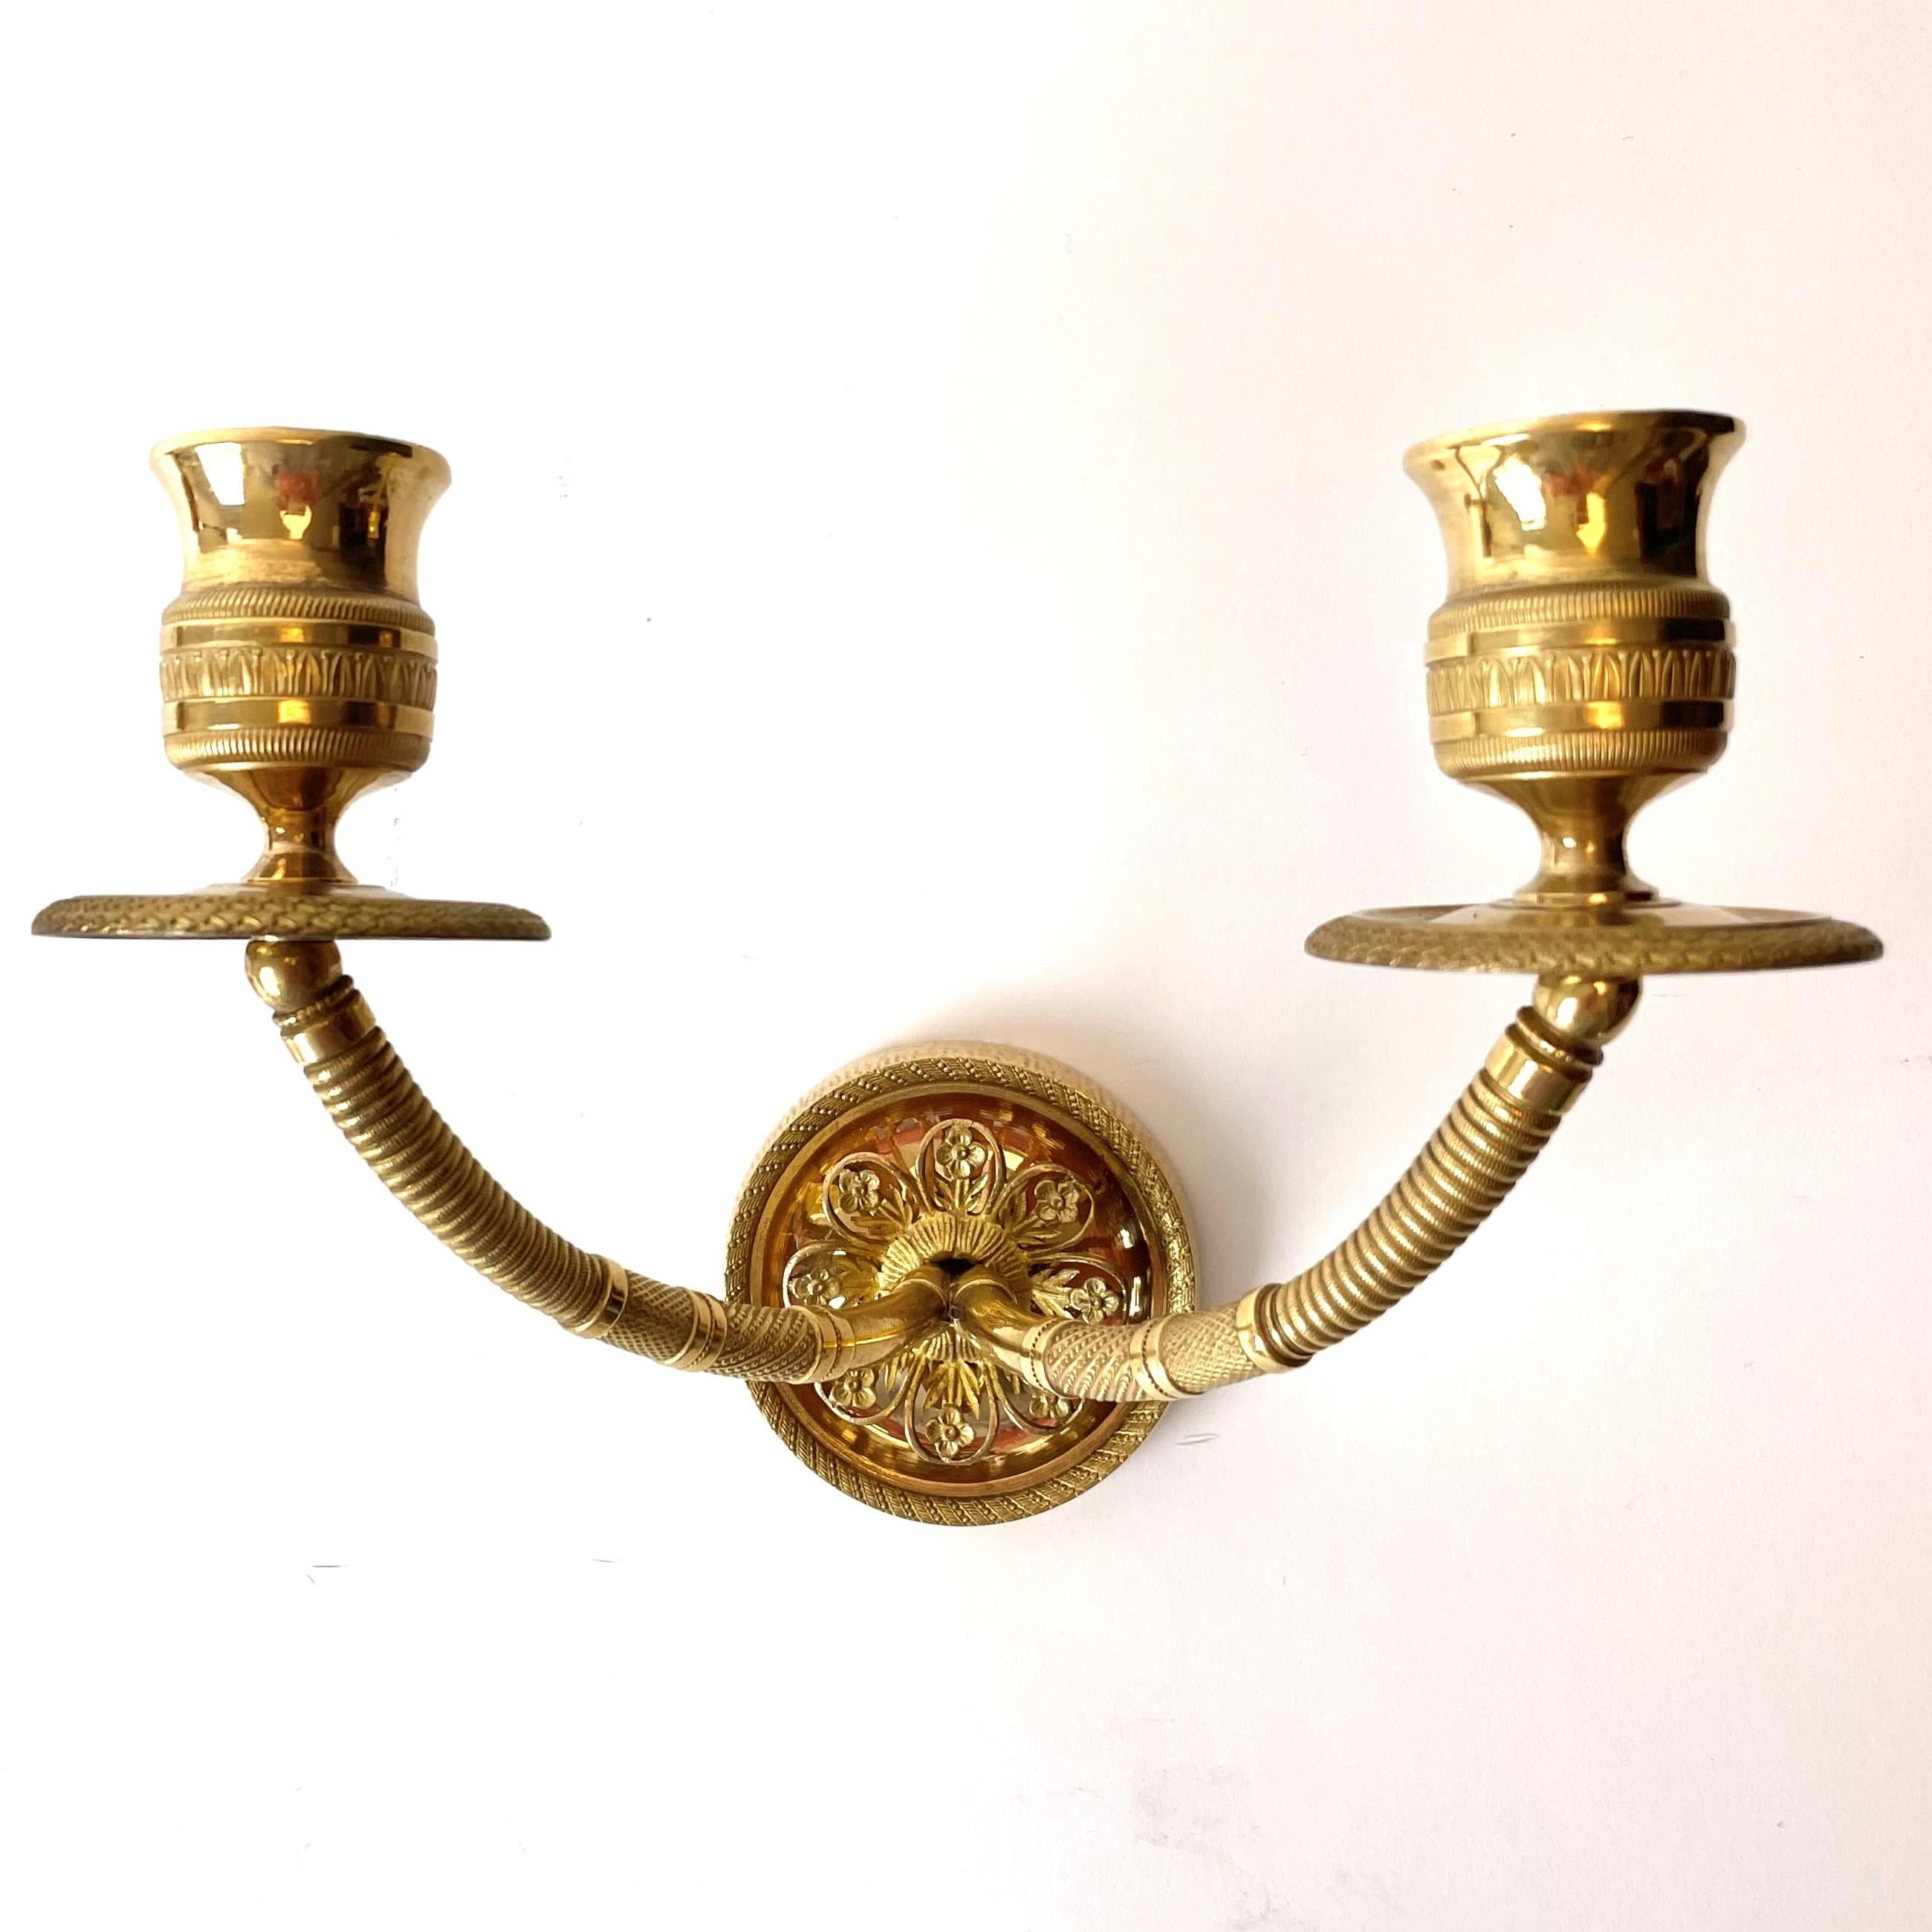 French Elegant Pair of Empire Appliques in Gilt Bronze from Early 19th Century For Sale